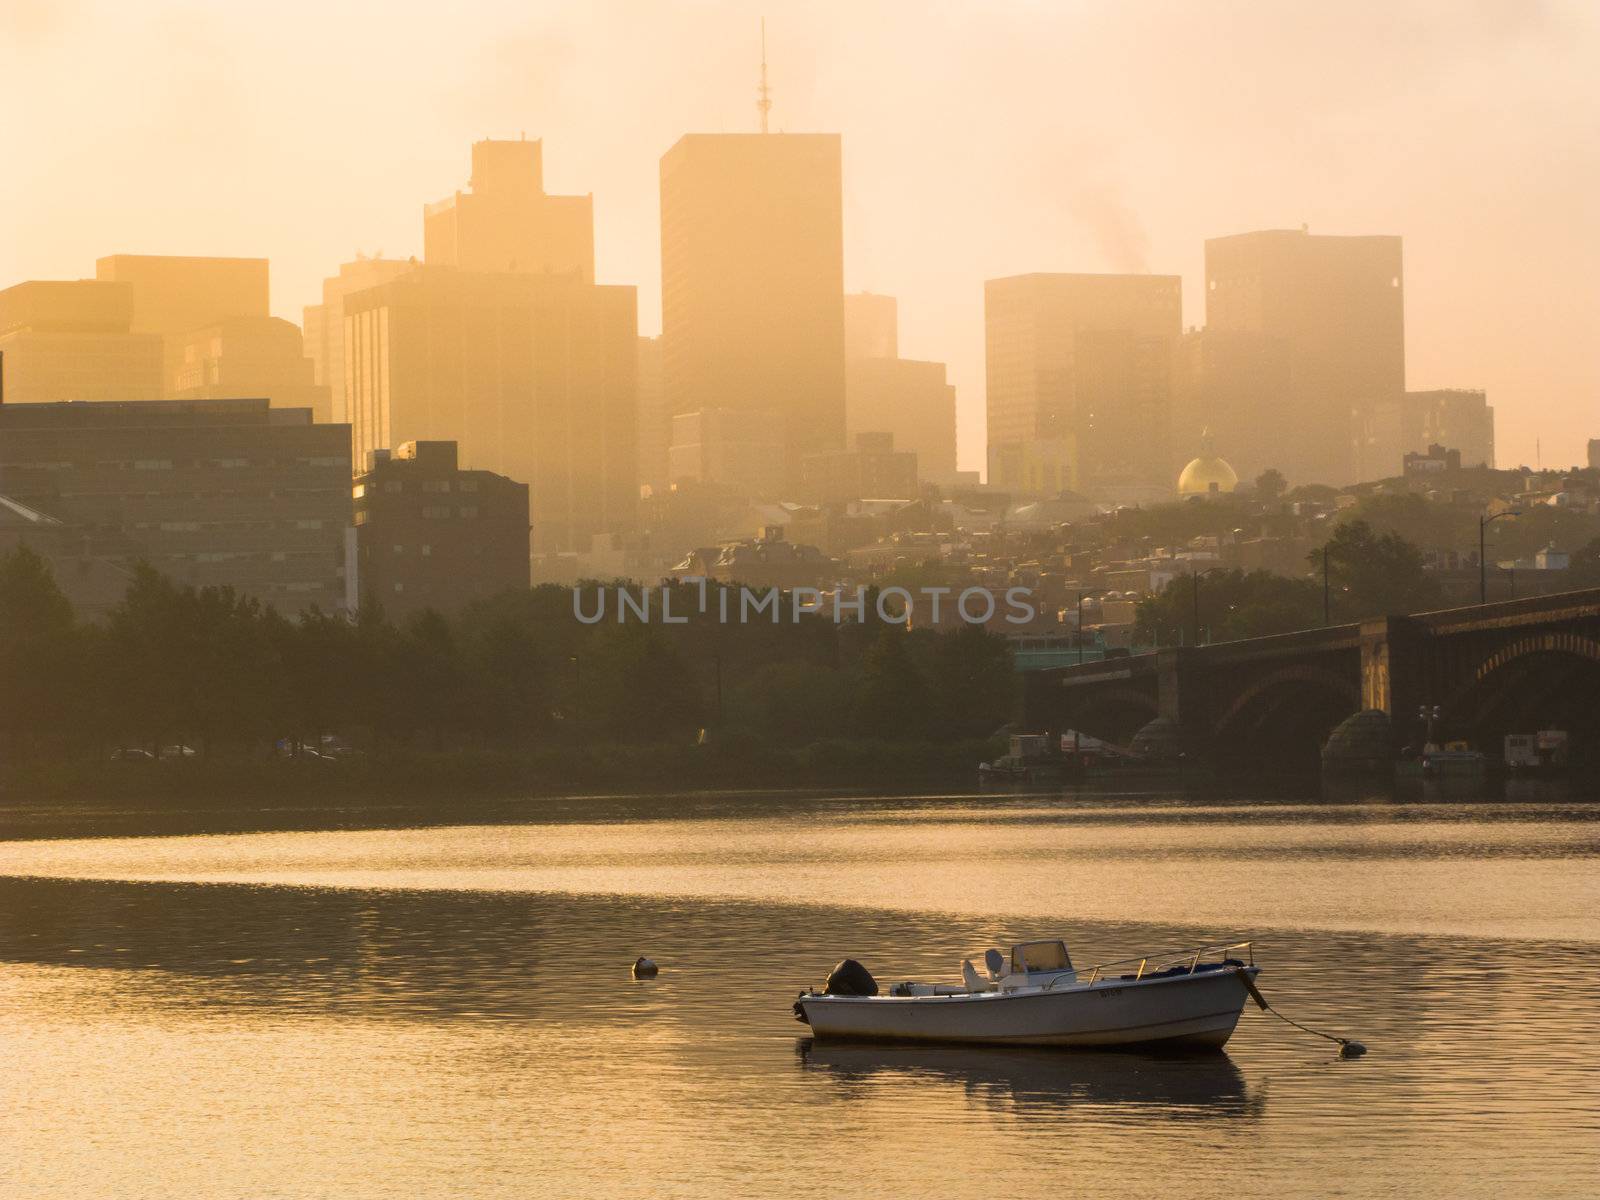 Motorboats anchored in the Charles River in Boston by edan